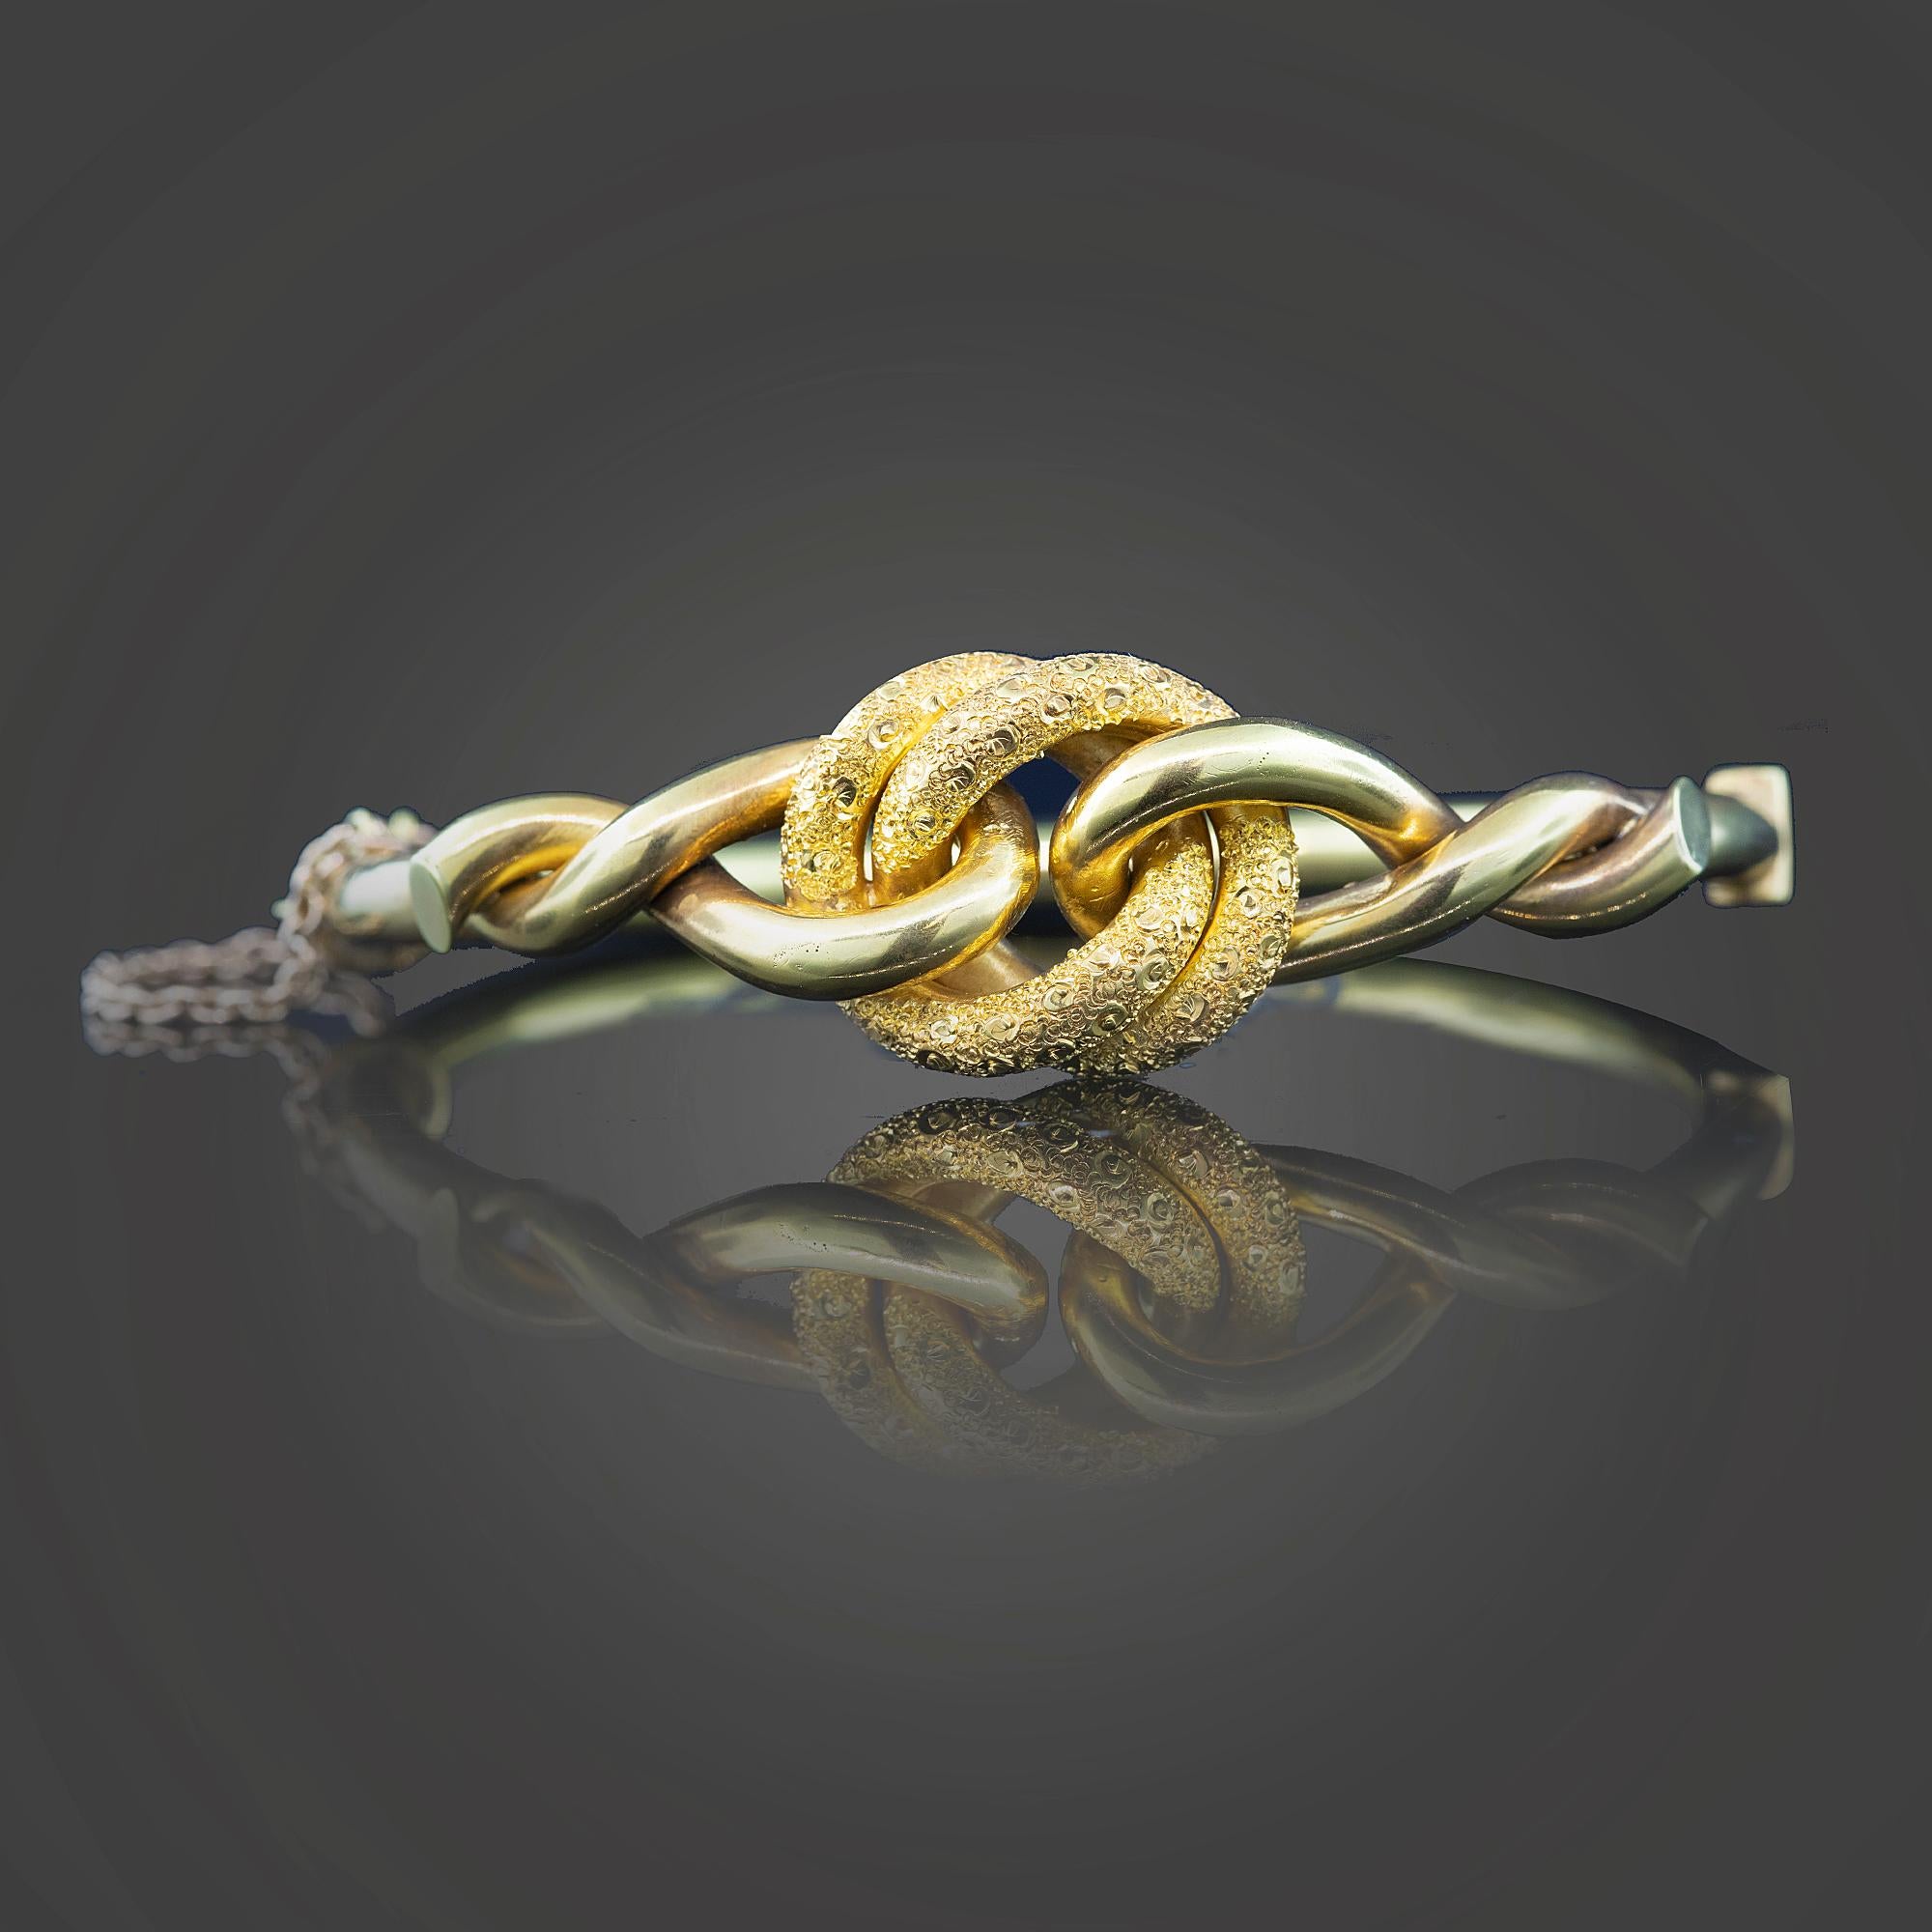 Victorian yellow gold “Lovers Knot” hollow hinged bangle. The knot comprises of a polished and an embossed finish Secured with a box style clasp and fitted with a safety chain.

Metal: 9k yellow gold
Weight: 11.00 grams
Measurements: Inner diameter